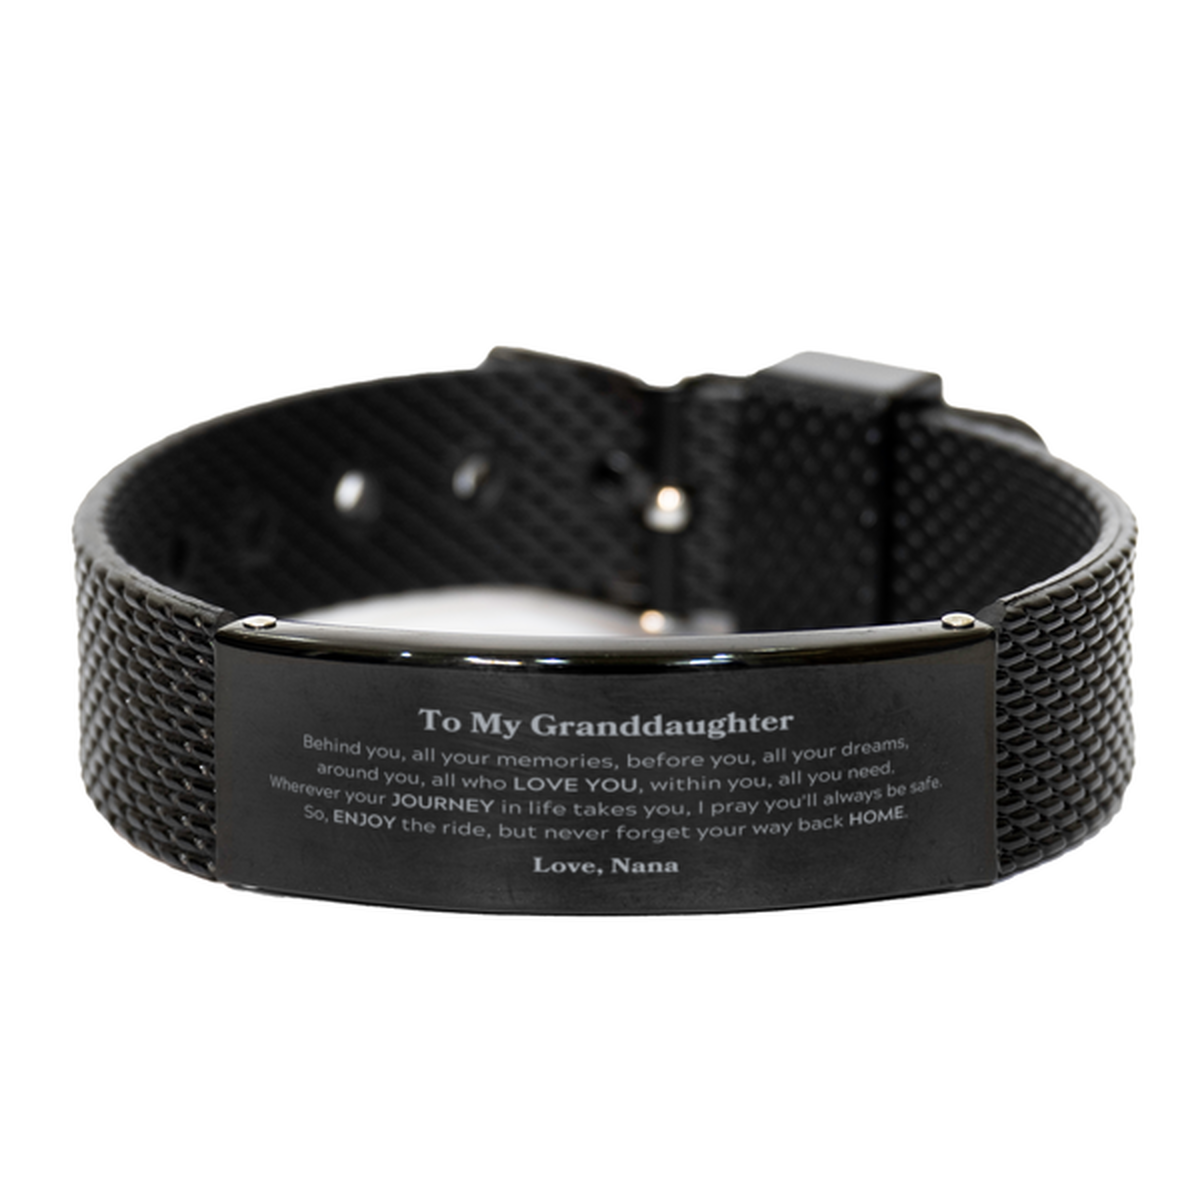 To My Granddaughter Graduation Gifts from Nana, Granddaughter Black Shark Mesh Bracelet Christmas Birthday Gifts for Granddaughter Behind you, all your memories, before you, all your dreams. Love, Nana